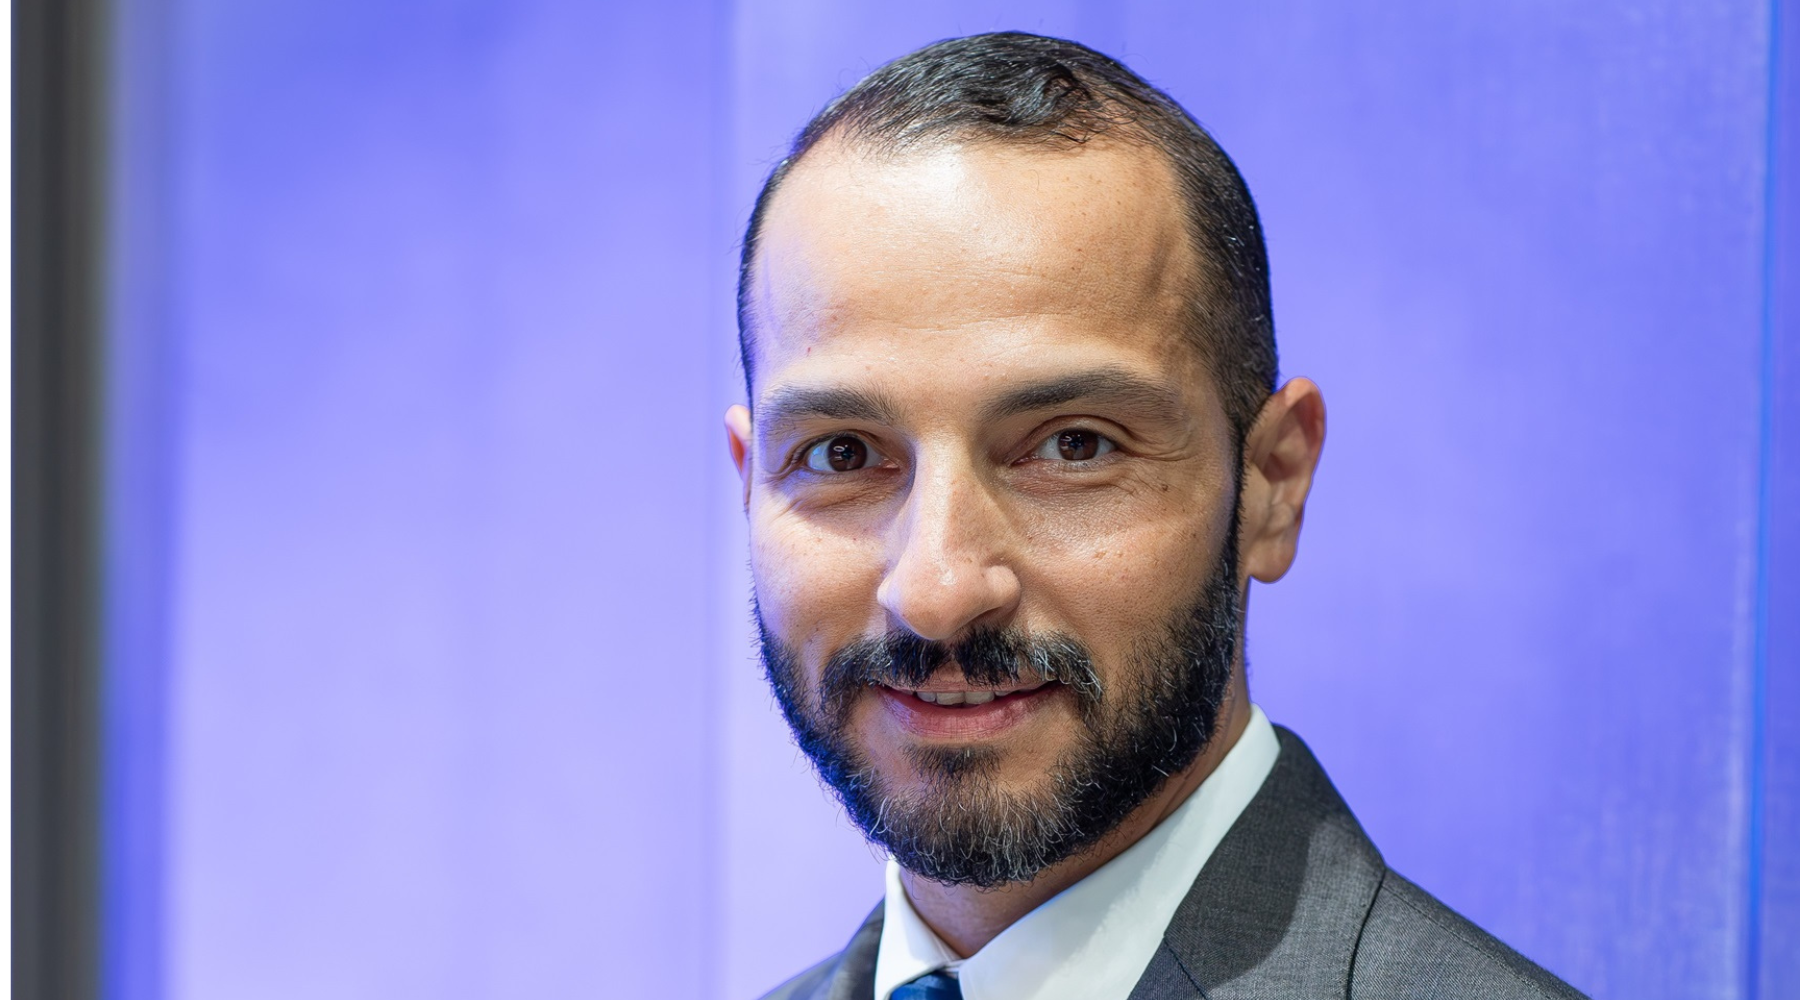 BMW Group Appoints Rami Joudi to Spearhead Corporate Communications